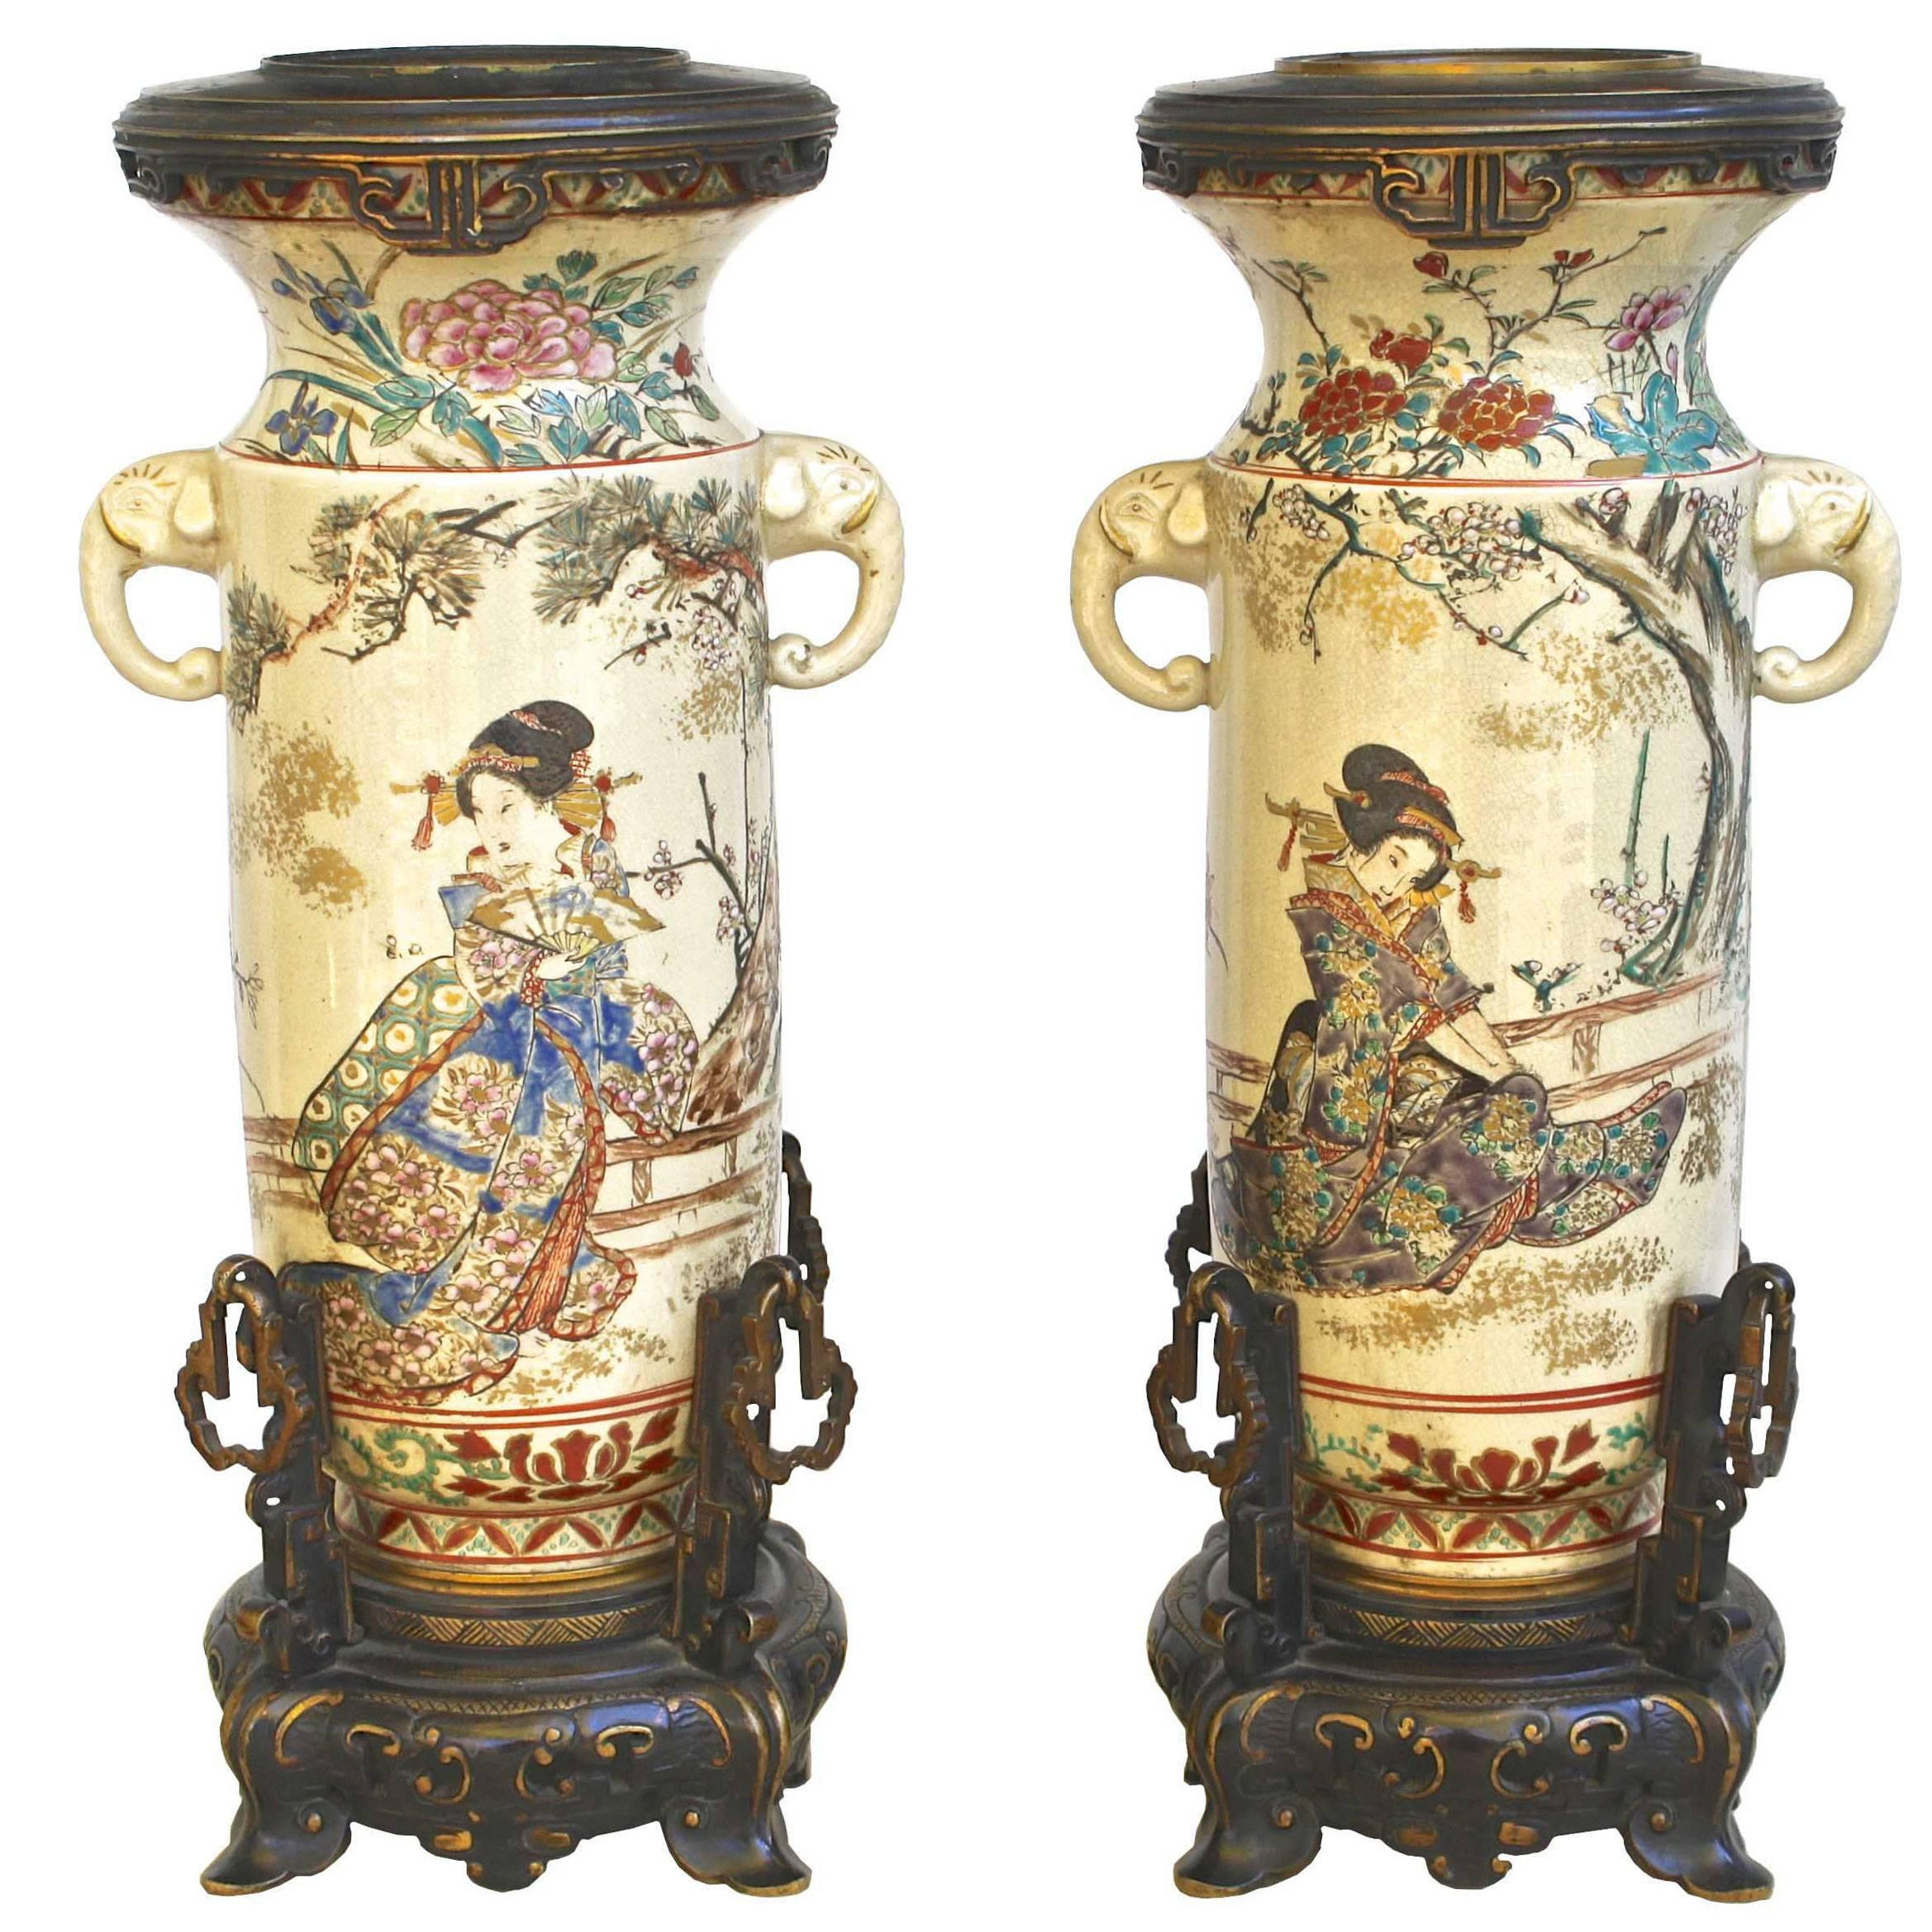 16 Recommended Satsuma China Vase 2024 free download satsuma china vase of early 20th century pair of japanese satsuma vases in painted ceramic in early 20th century pair of japanese satsuma vases in painted ceramic for sale at 1stdibs